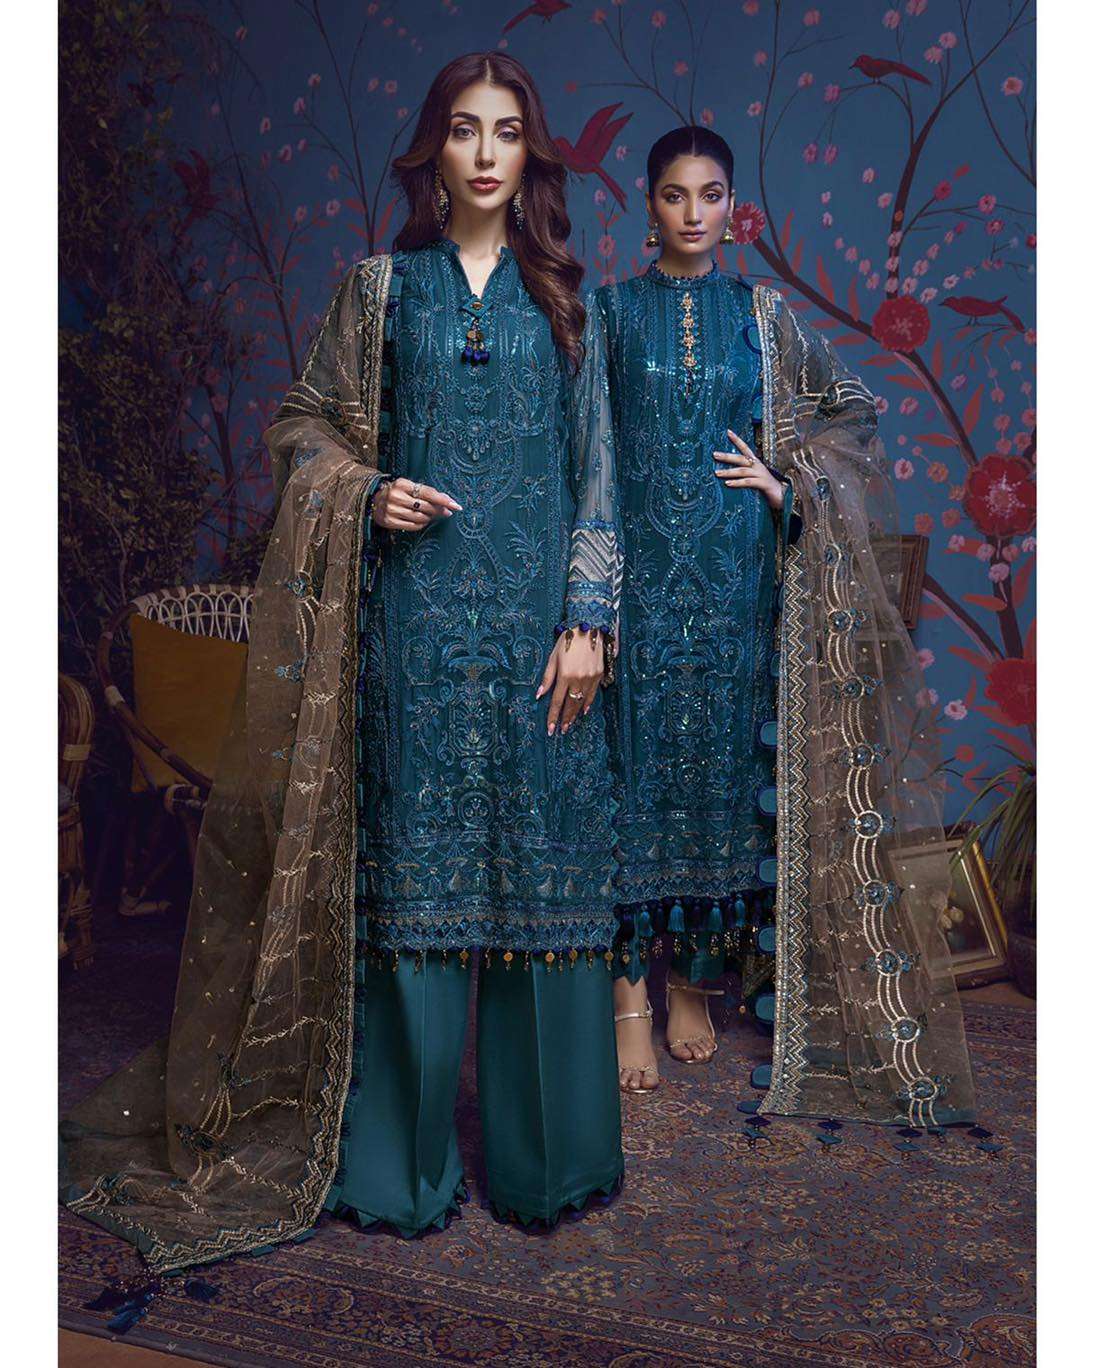 CHIFFON surat,India,100% BARROCO original from retail product buy guranteed ahmed in online COLLECTION EMB wholesale ADAN suit EXCLUSIVE LIBAS creation,pakistani